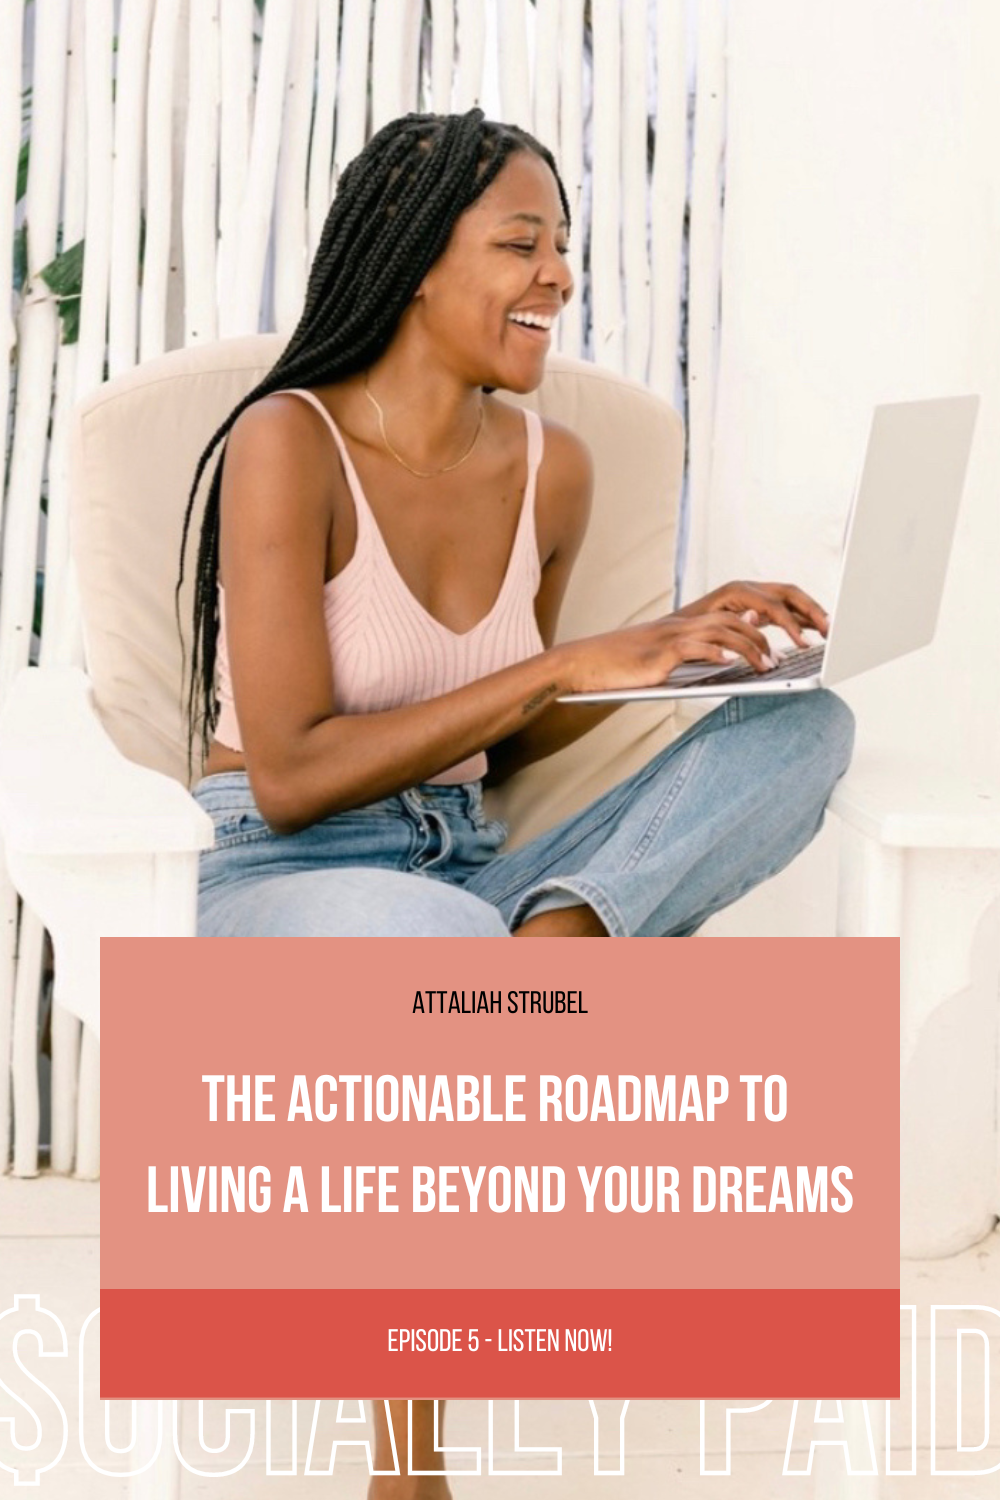 The Actionable Roadmap to Living a Life Beyond Your Dreams